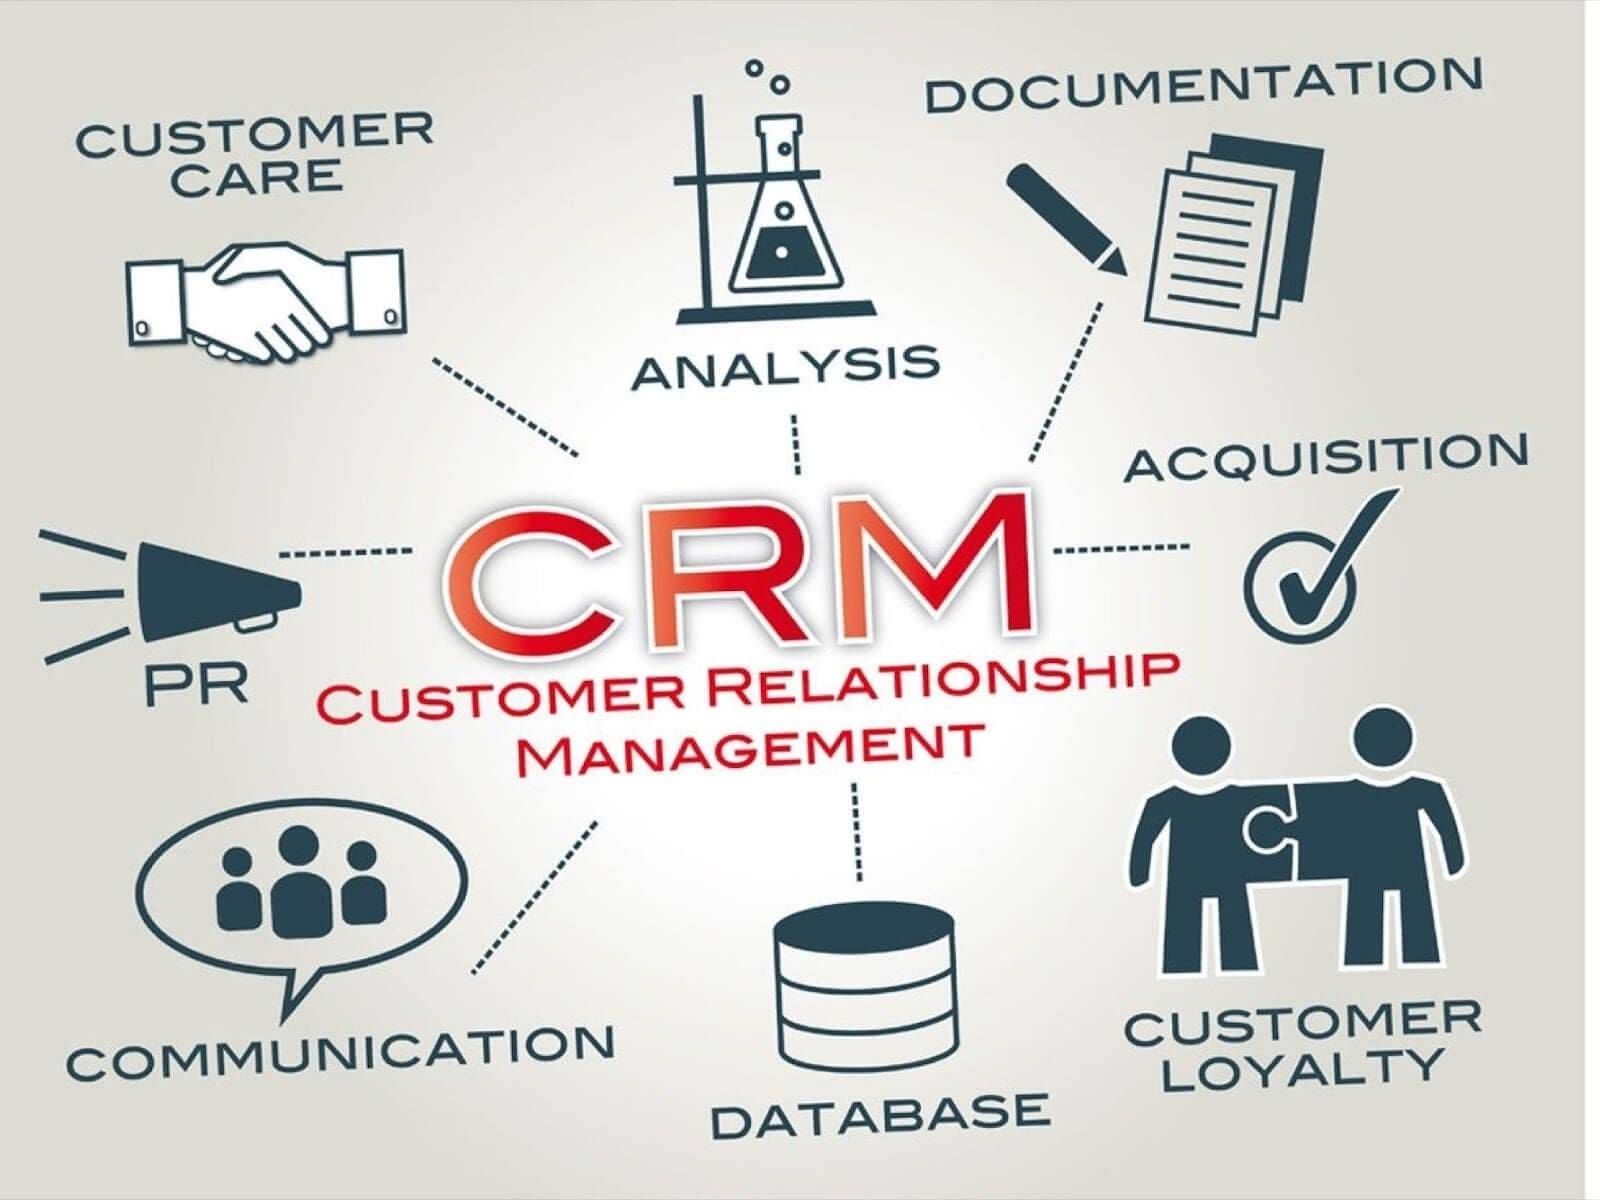 5. How to Use CRM to Automate and Streamline Customer Relationship Efforts